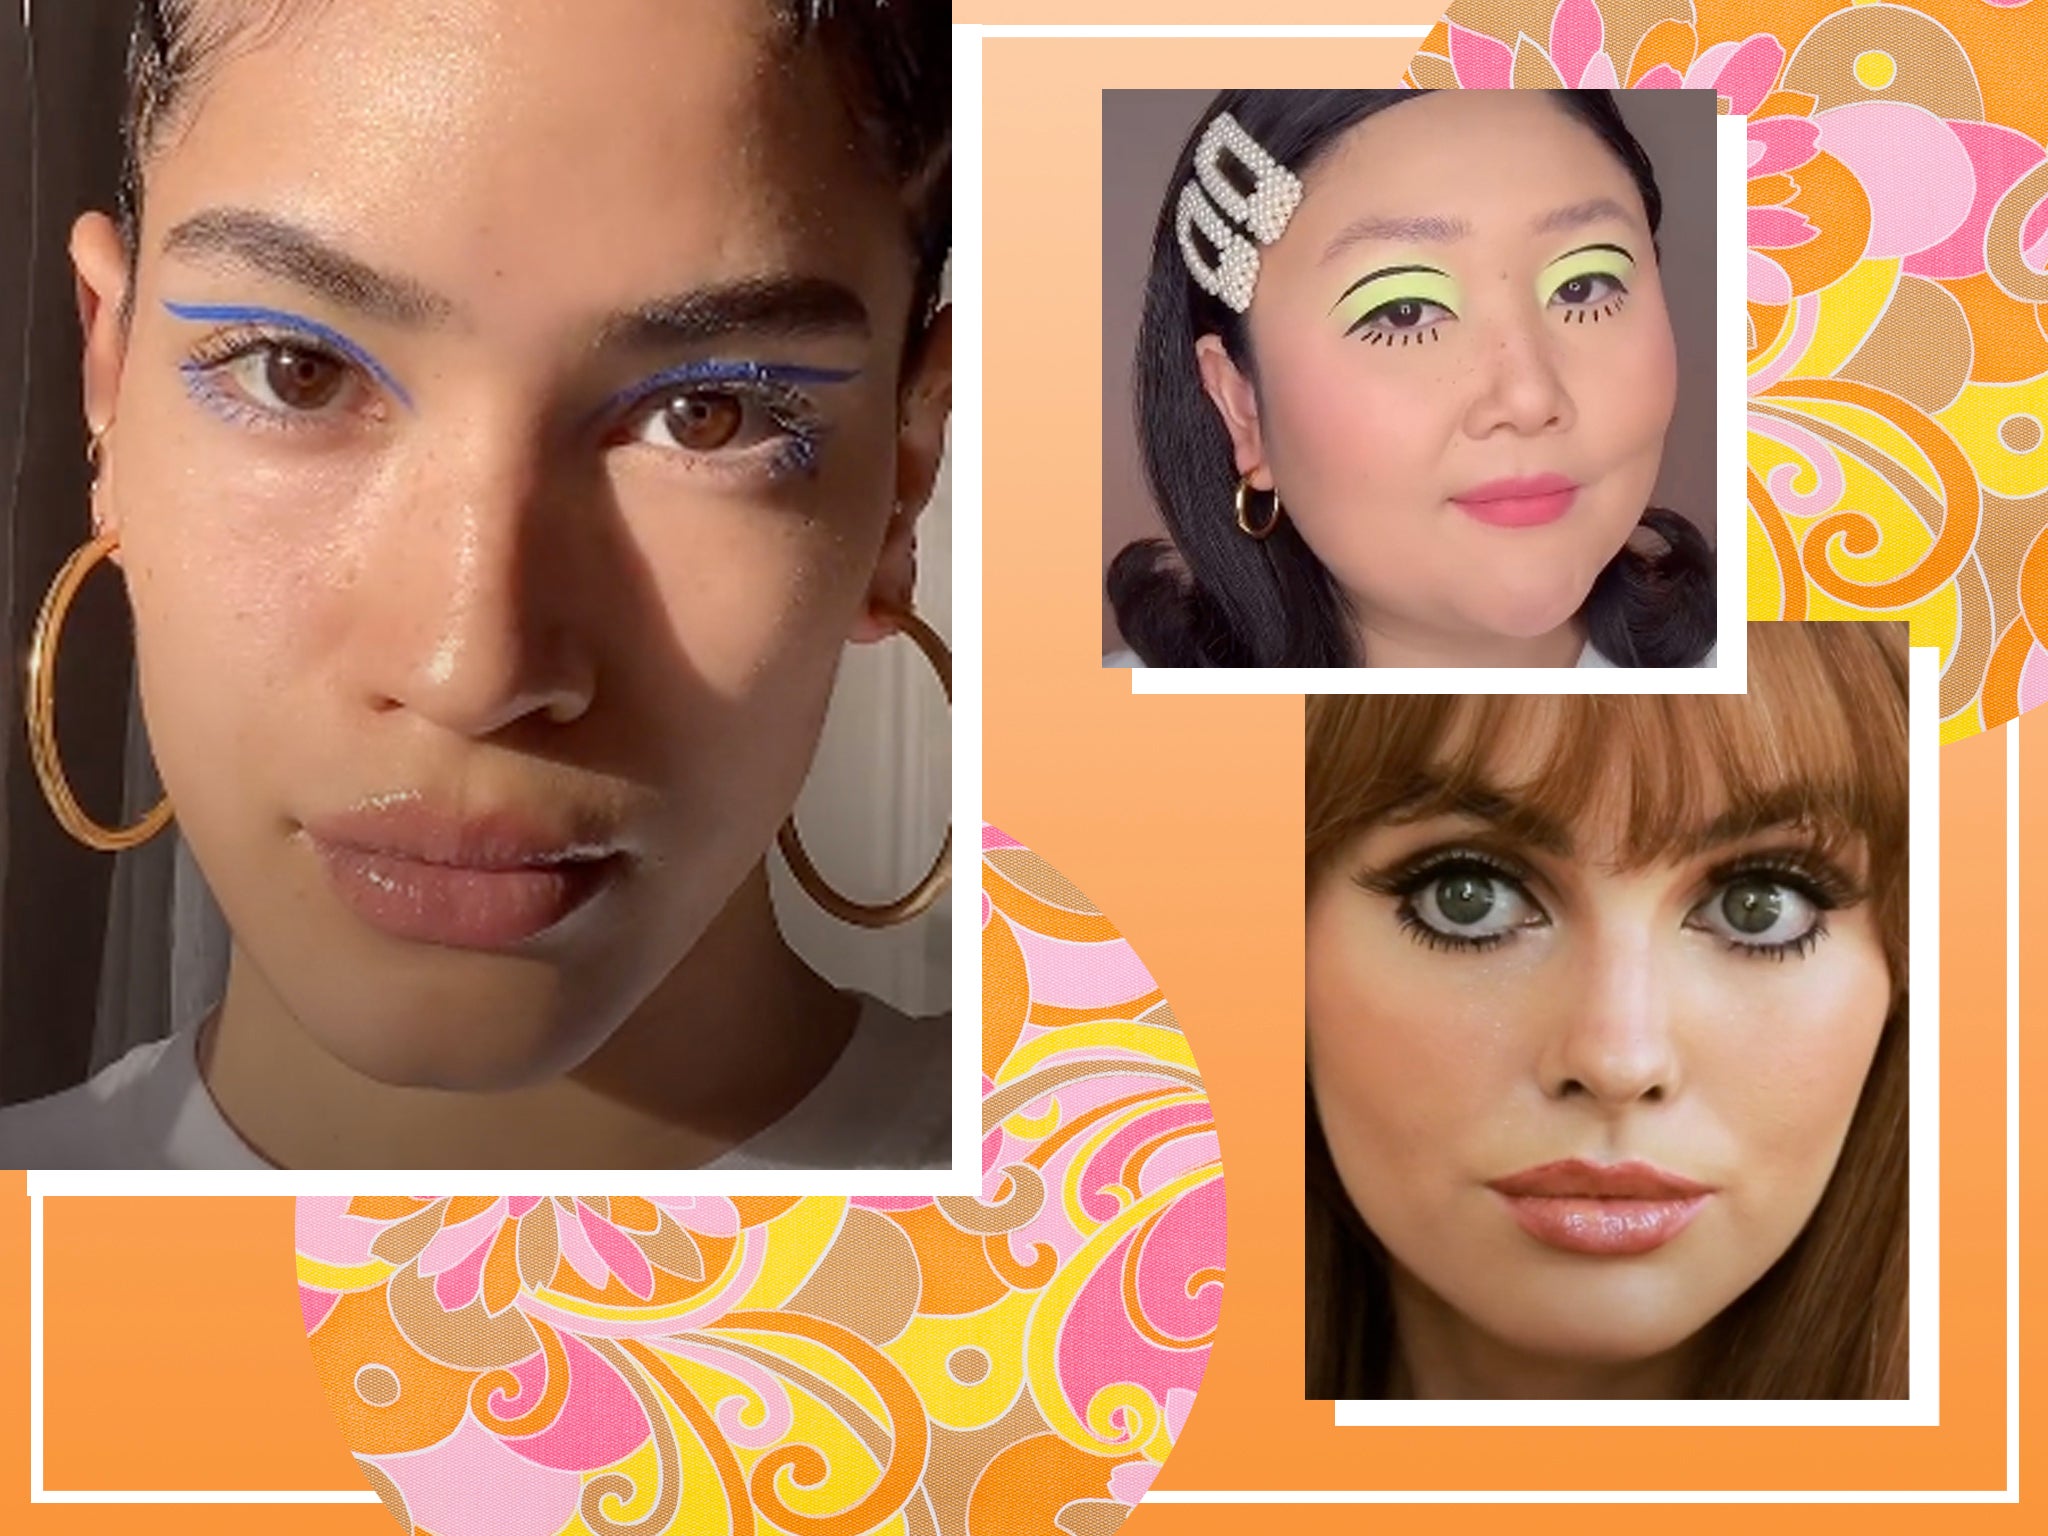 We asked the experts about what products and techniques to use to get the look